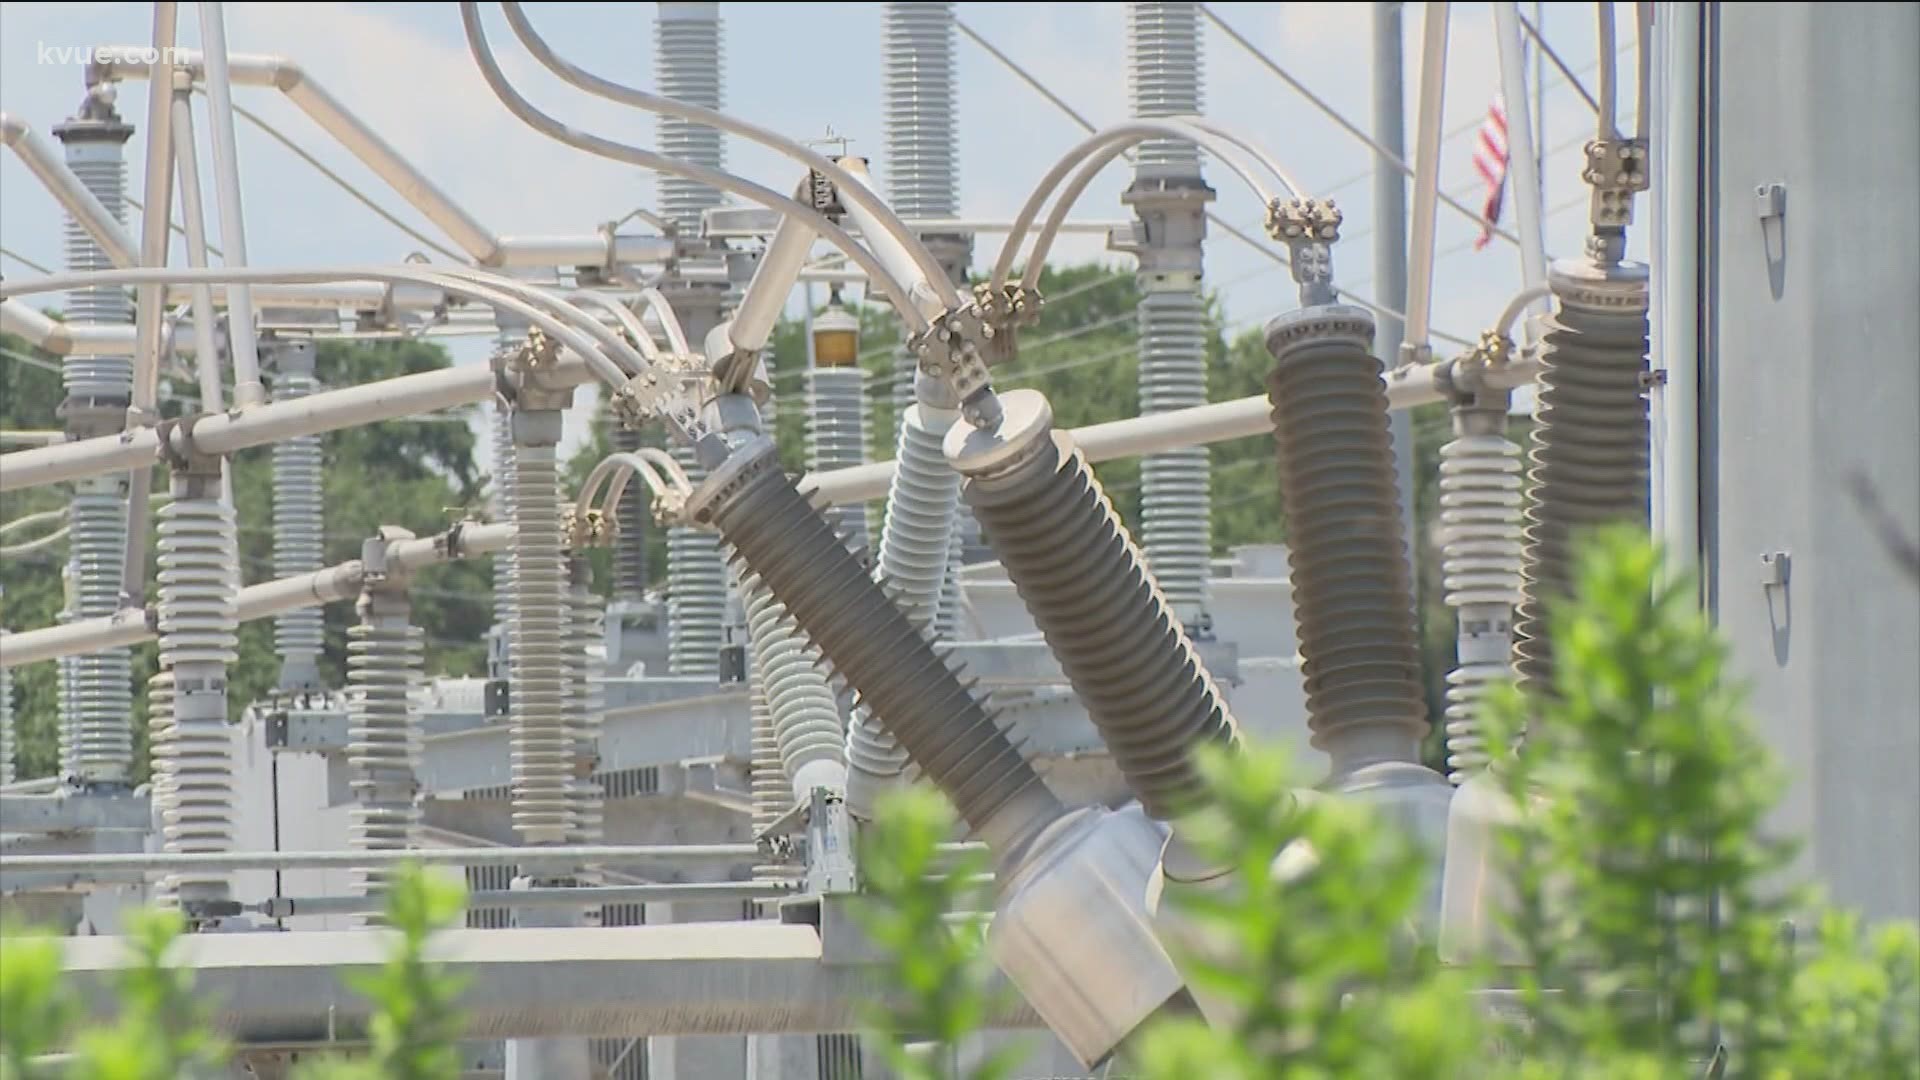 Public Utility Commission officials told ERCOT there is room for improvement when it comes to predicting energy generation available.